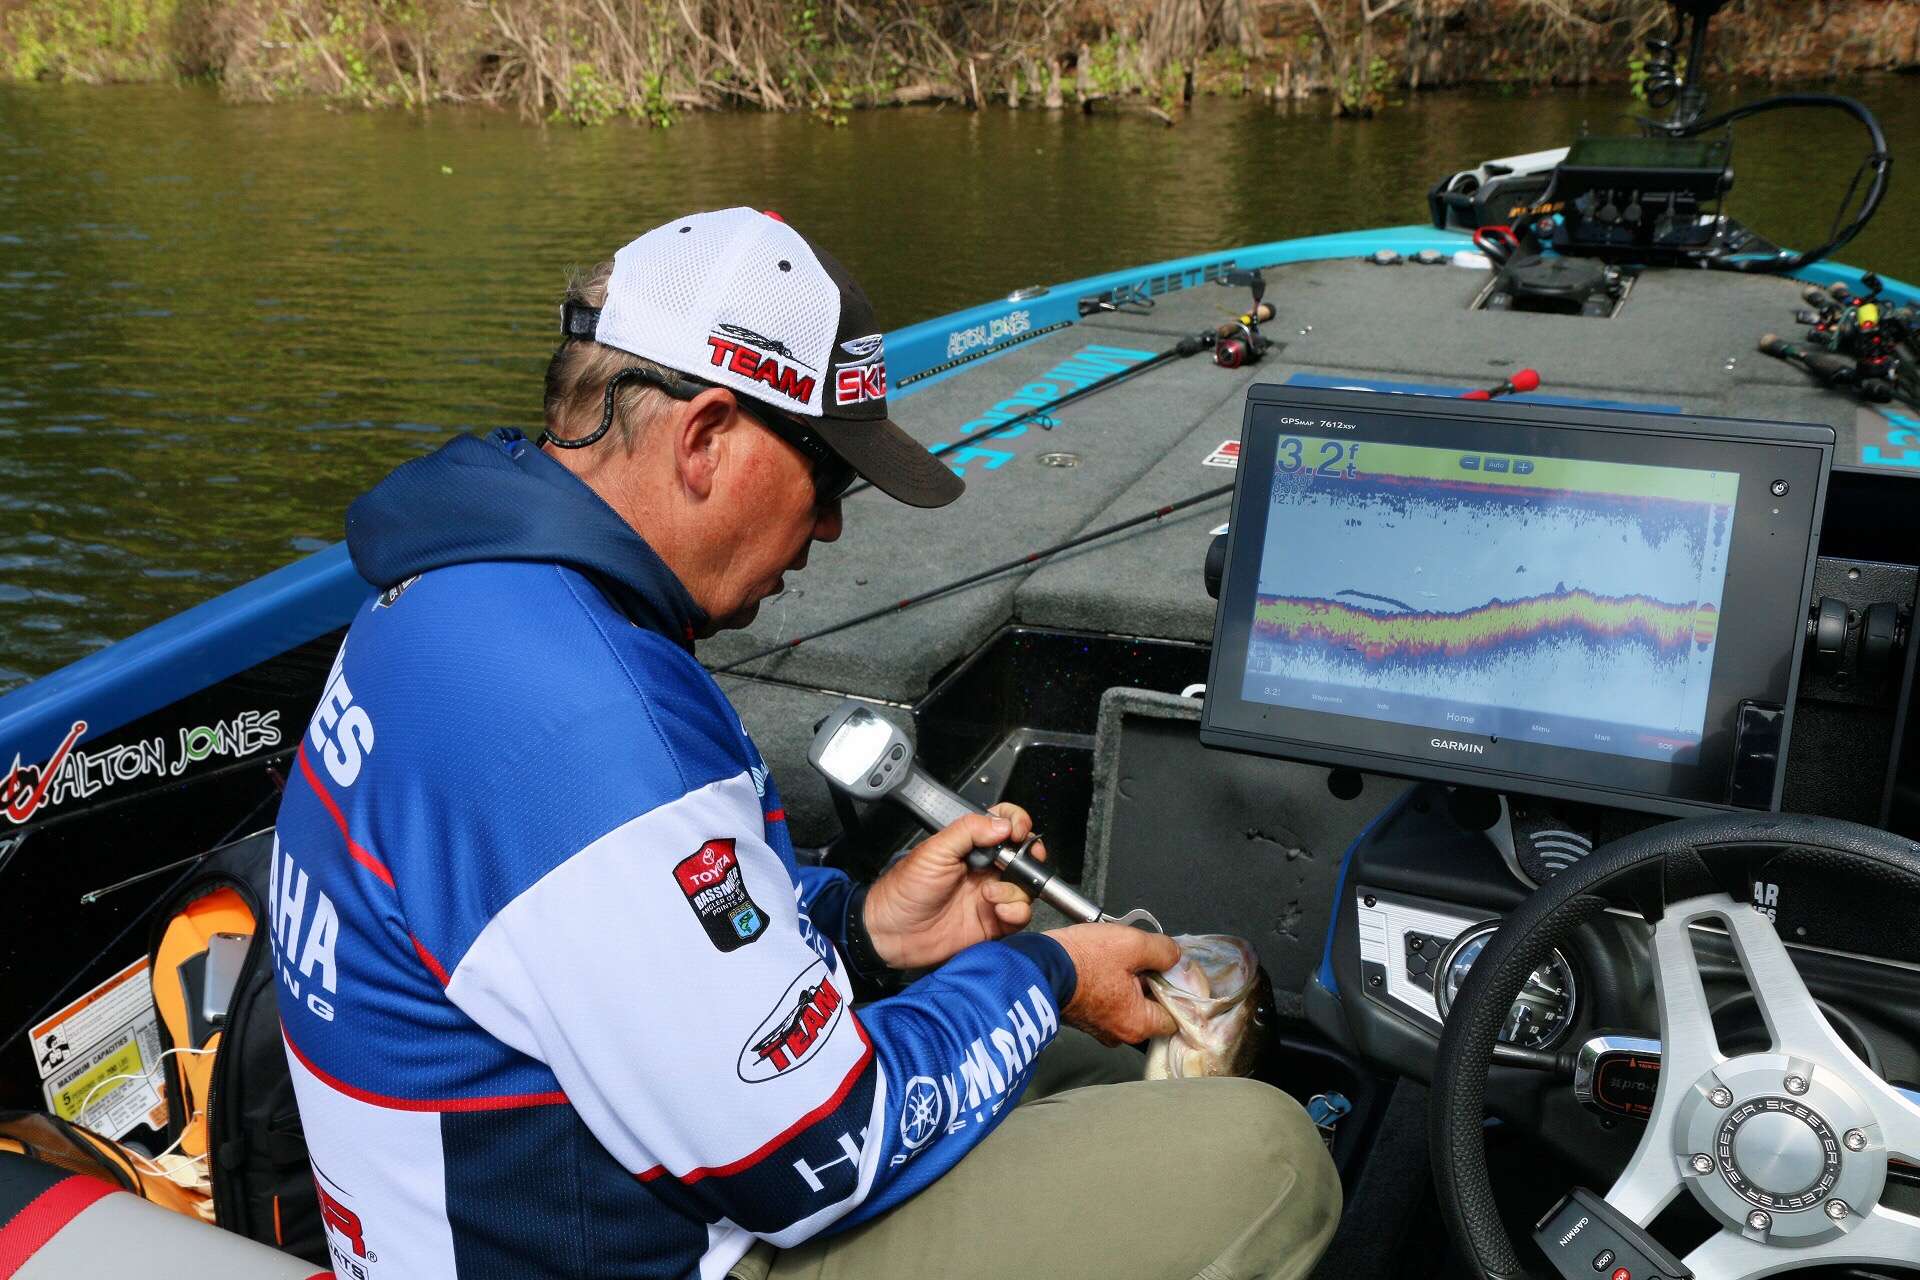 Alton Jones weighs a 3 pound 4 ounce fish to fill out his limit. Now he's searching for a big bedding fish to upgrade his bag.